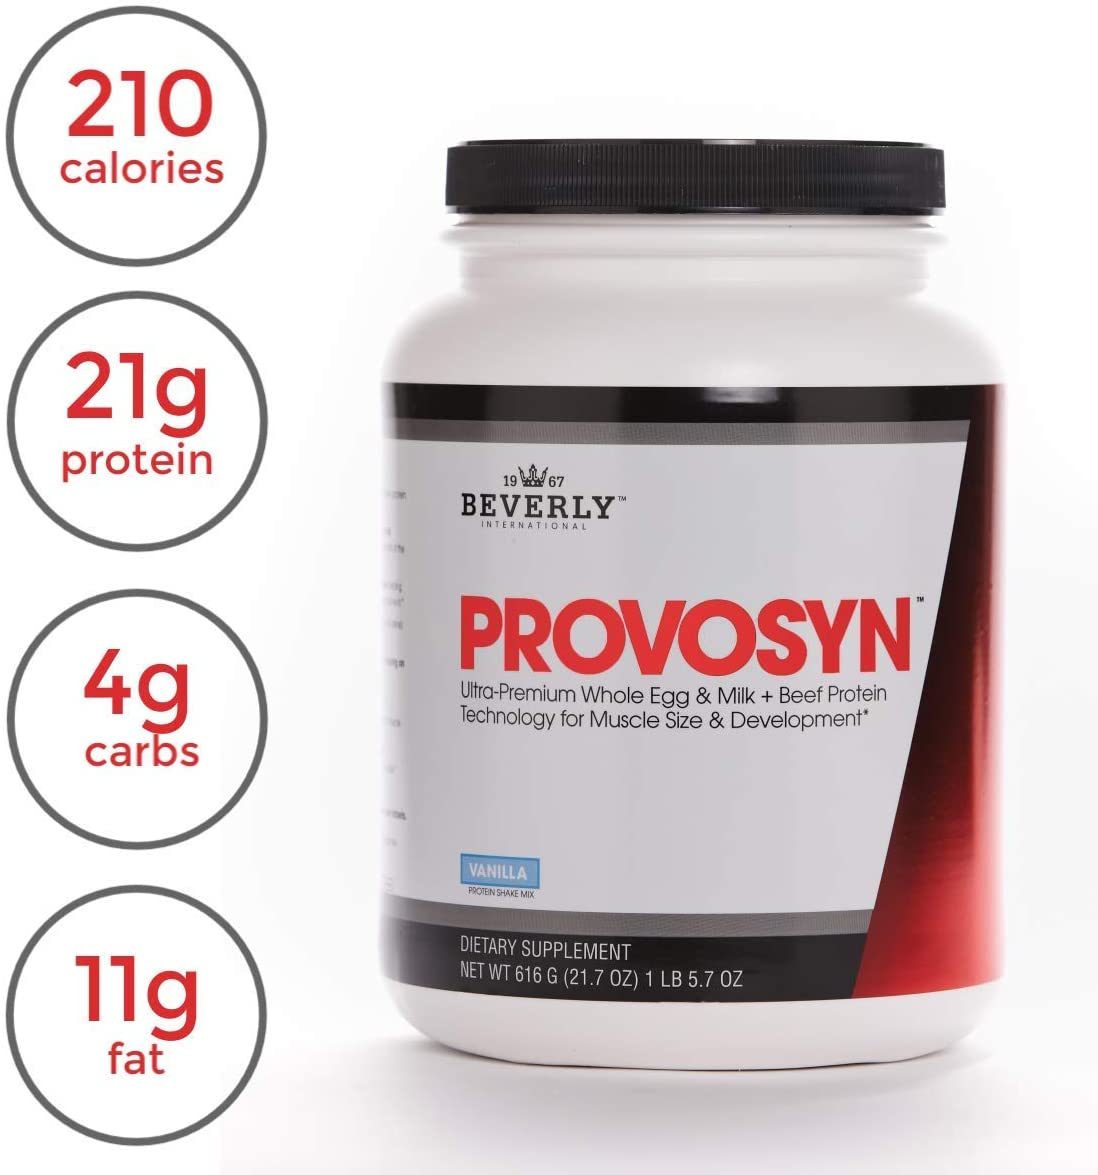 PROVOSYN. The Original Ultra-Premium Whole Egg, Milk (Casein + Whey) and Beef Protein Powder. Fast Muscle Building + Recovery. Perfect for Hard Gainers. Vanilla Flavor, 616 g The Mature Users Protein.